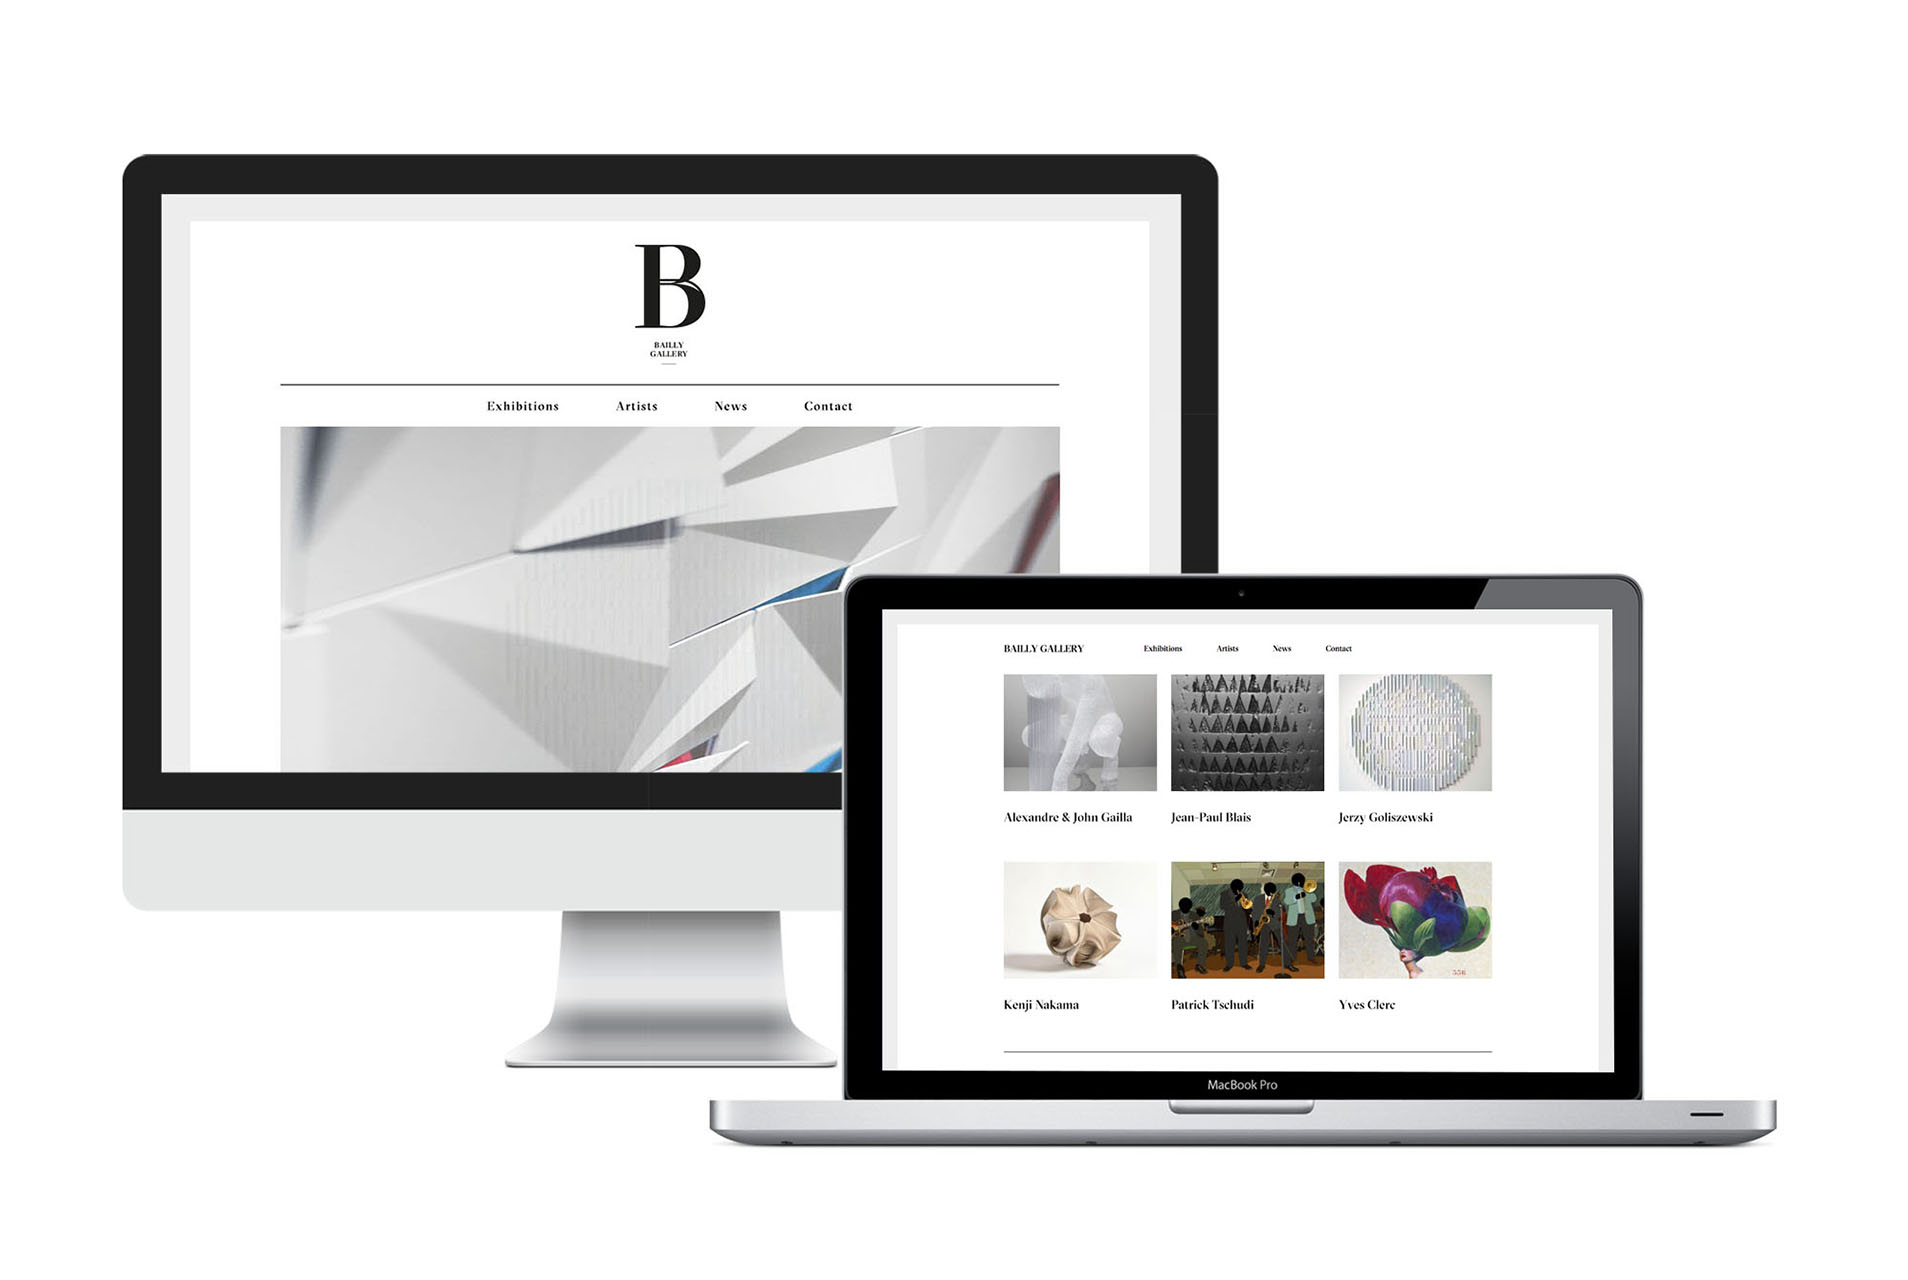 The new website for Bailly Gallery Geneva